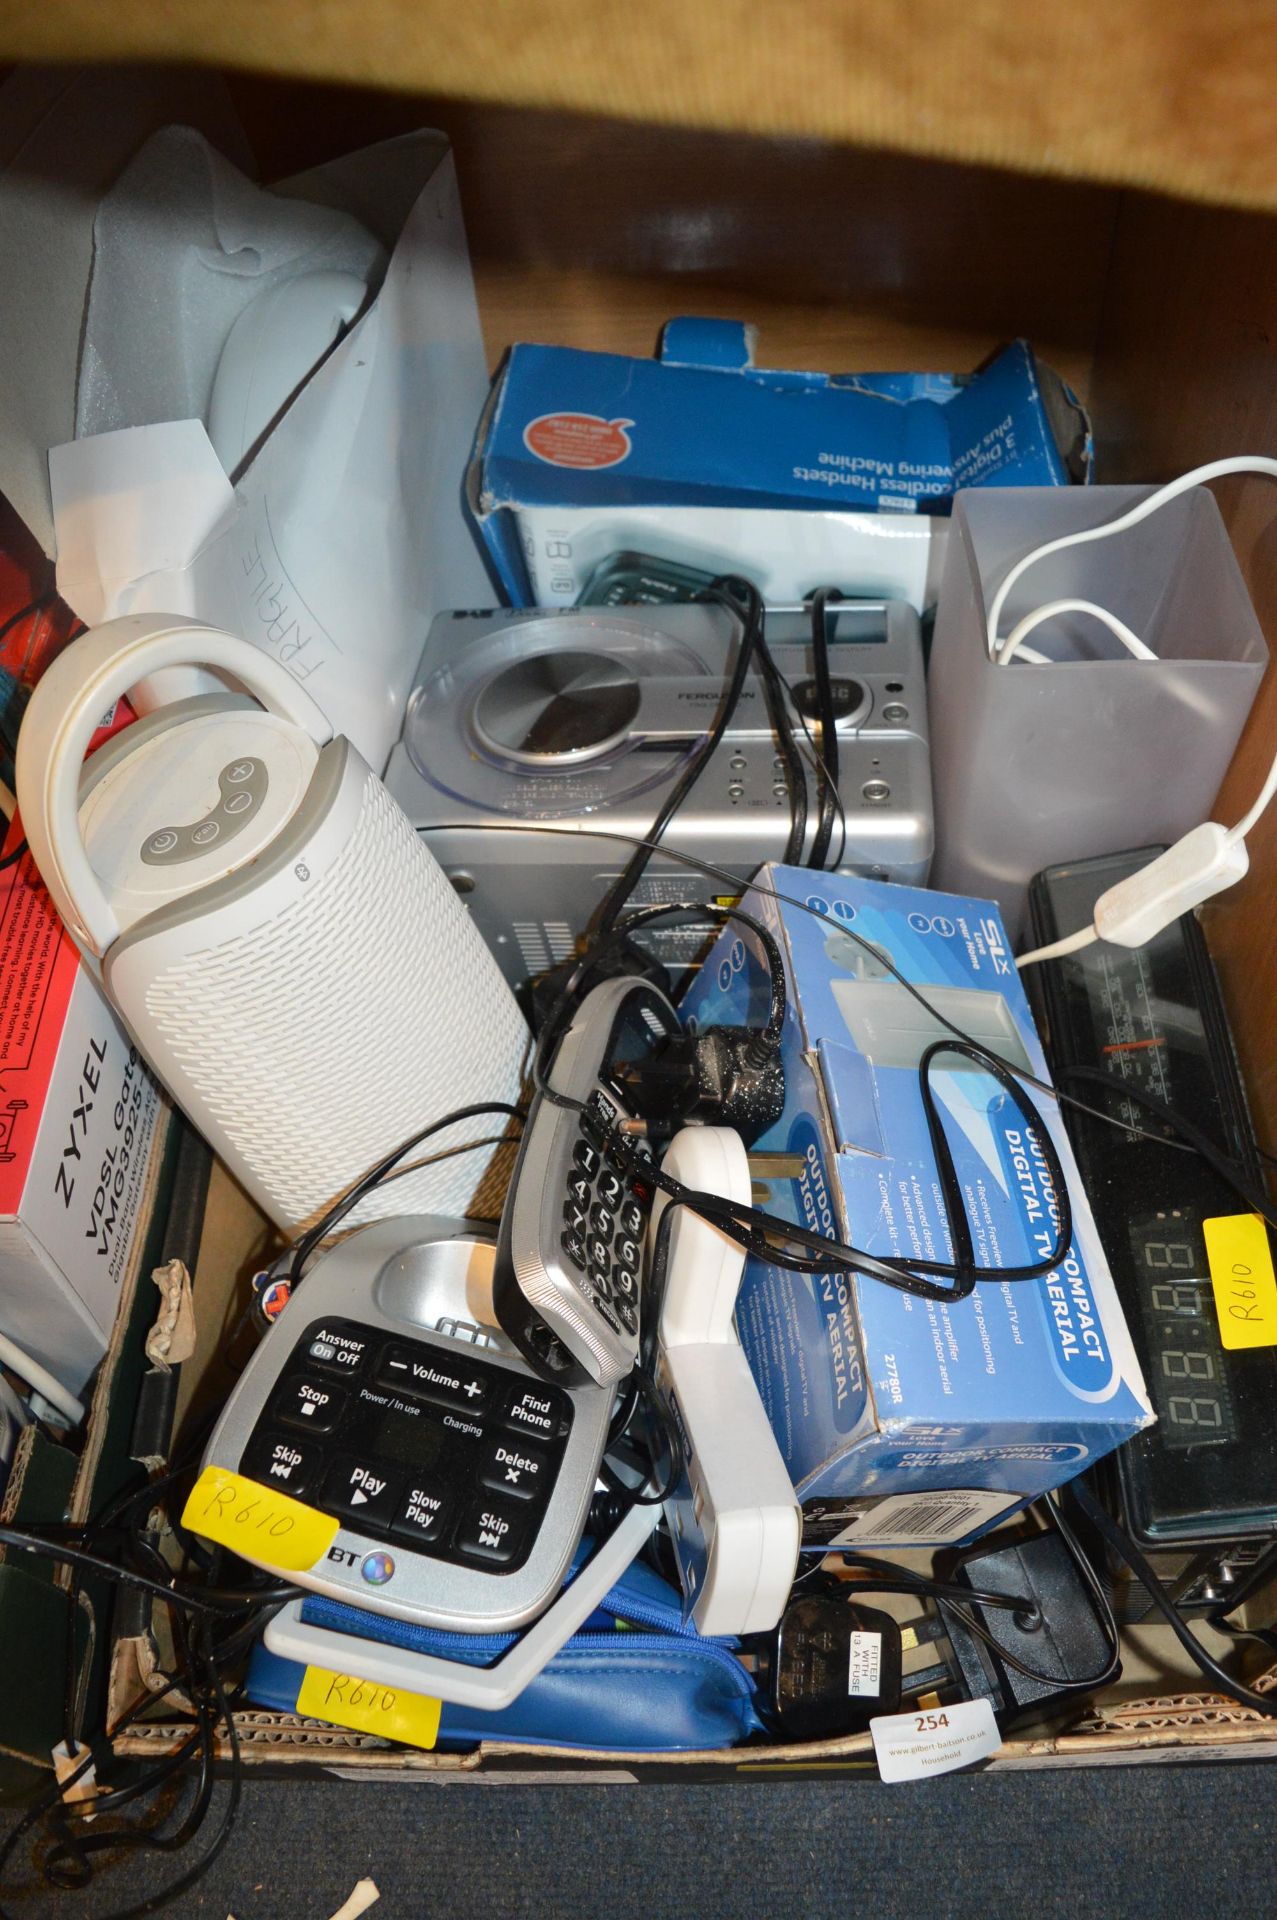 Electrical Items; DVD Players, Radios, etc.